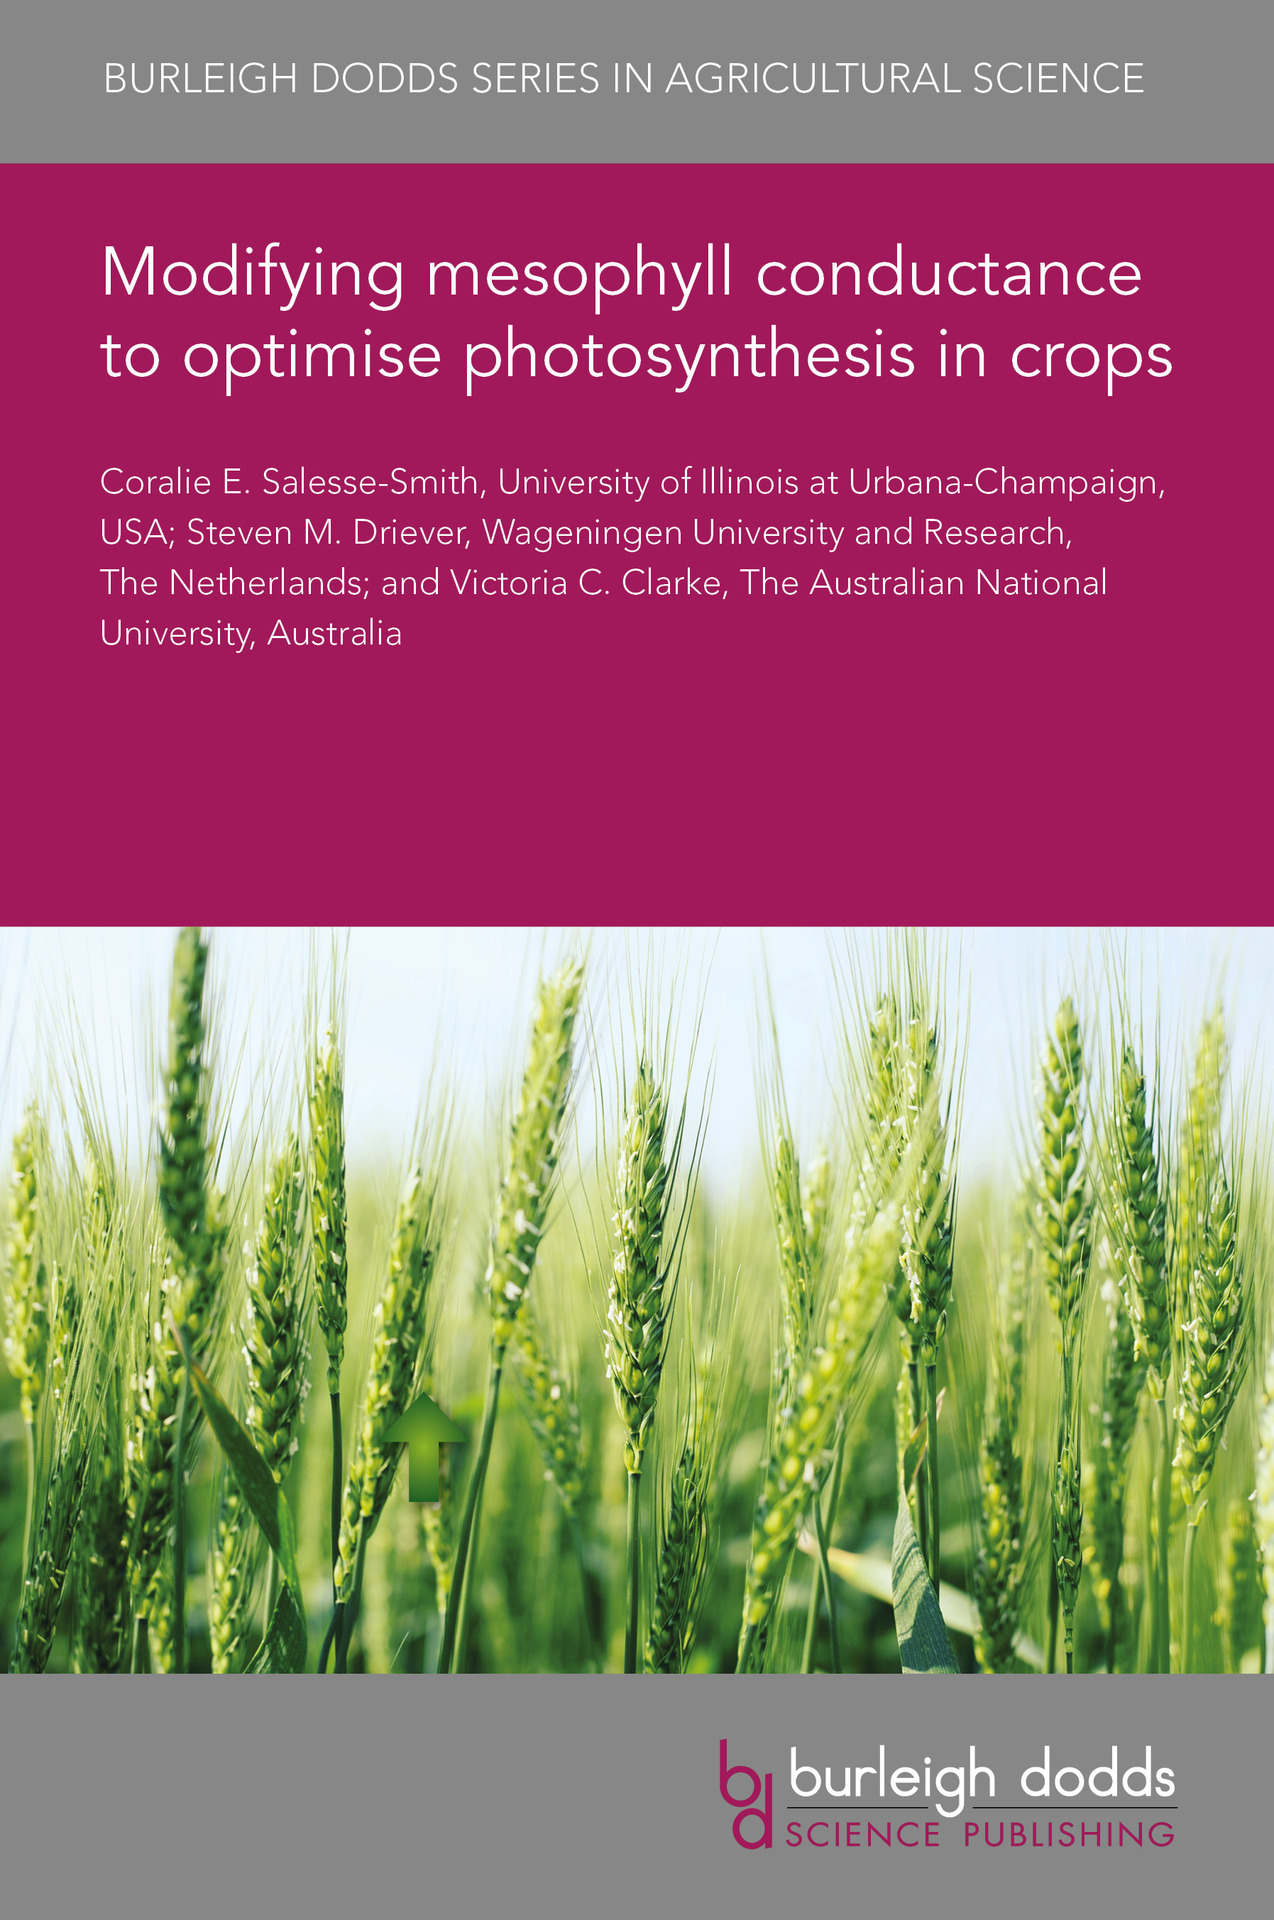 Modifying mesophyll conductance to optimise photosynthesis in crops